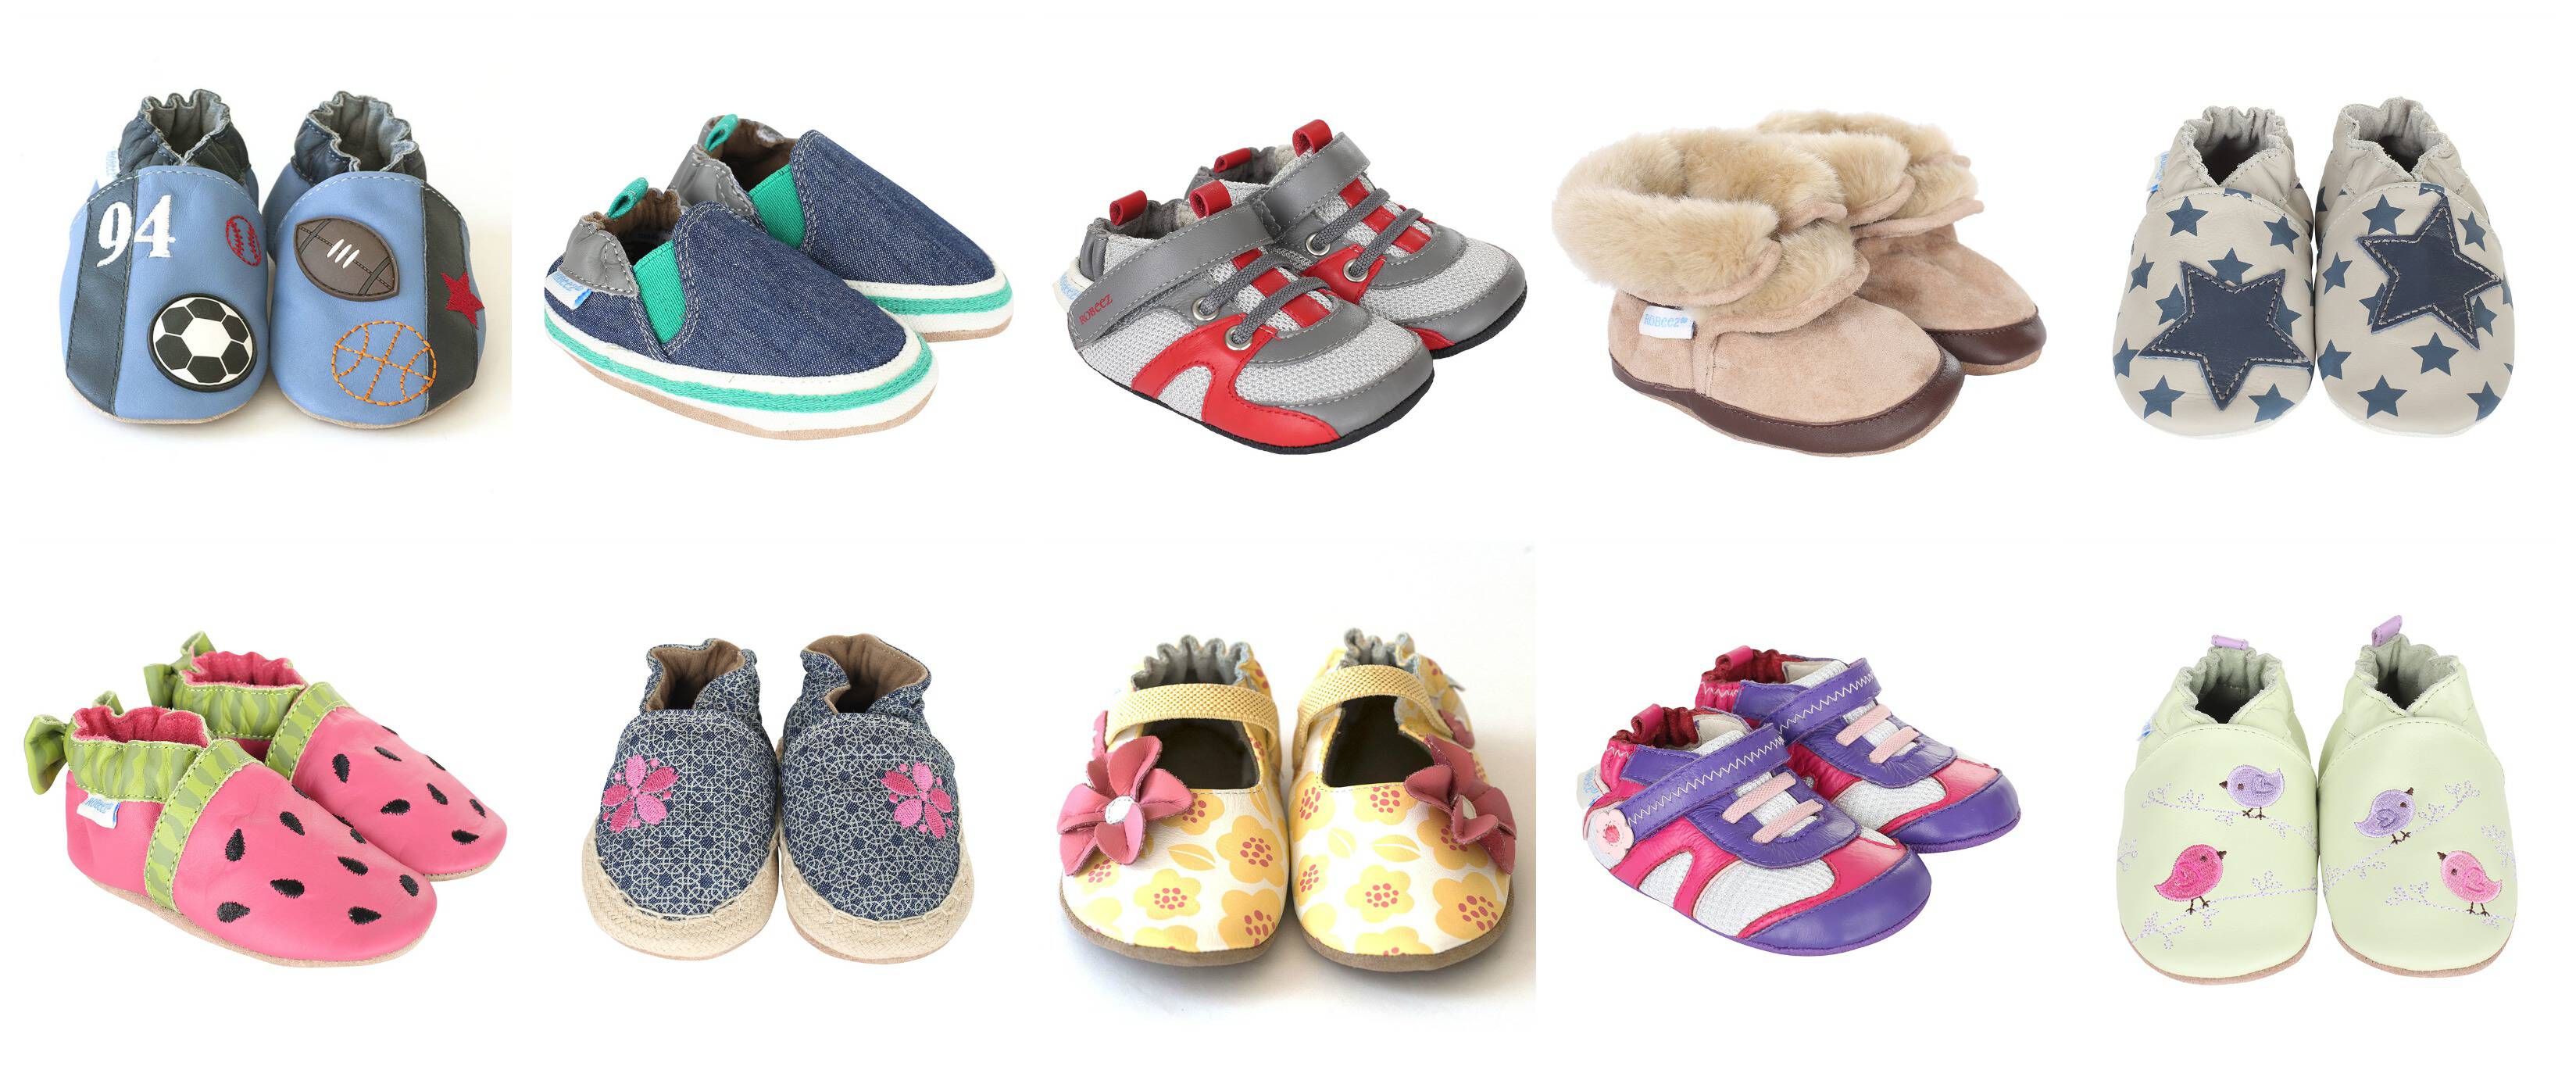 Robeez Shoes for Kids